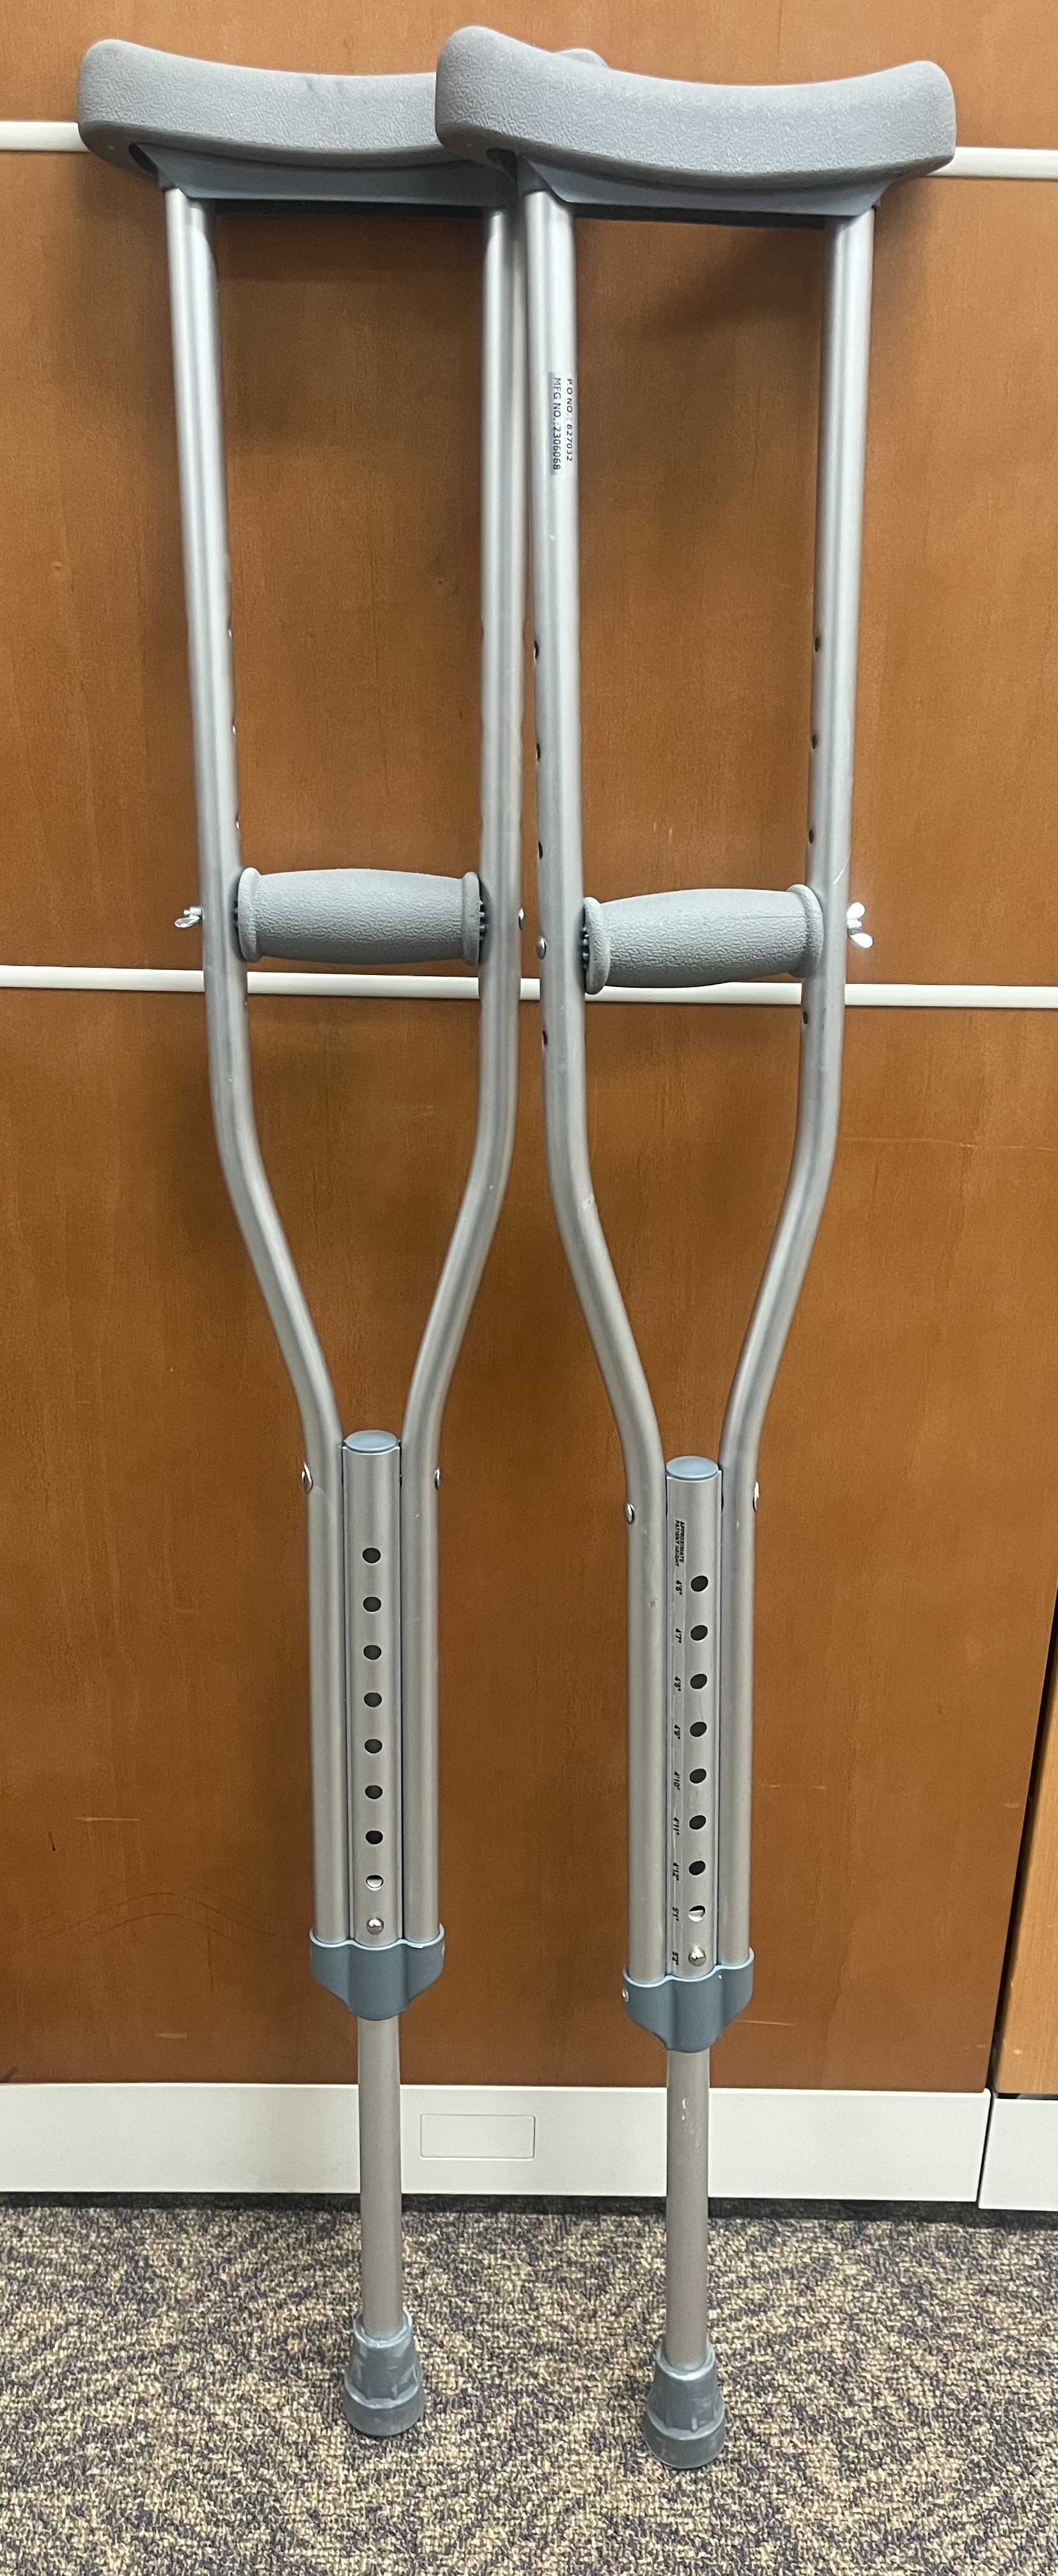 Thumbnail of Crutches- Aluminum Youth Adjustable.